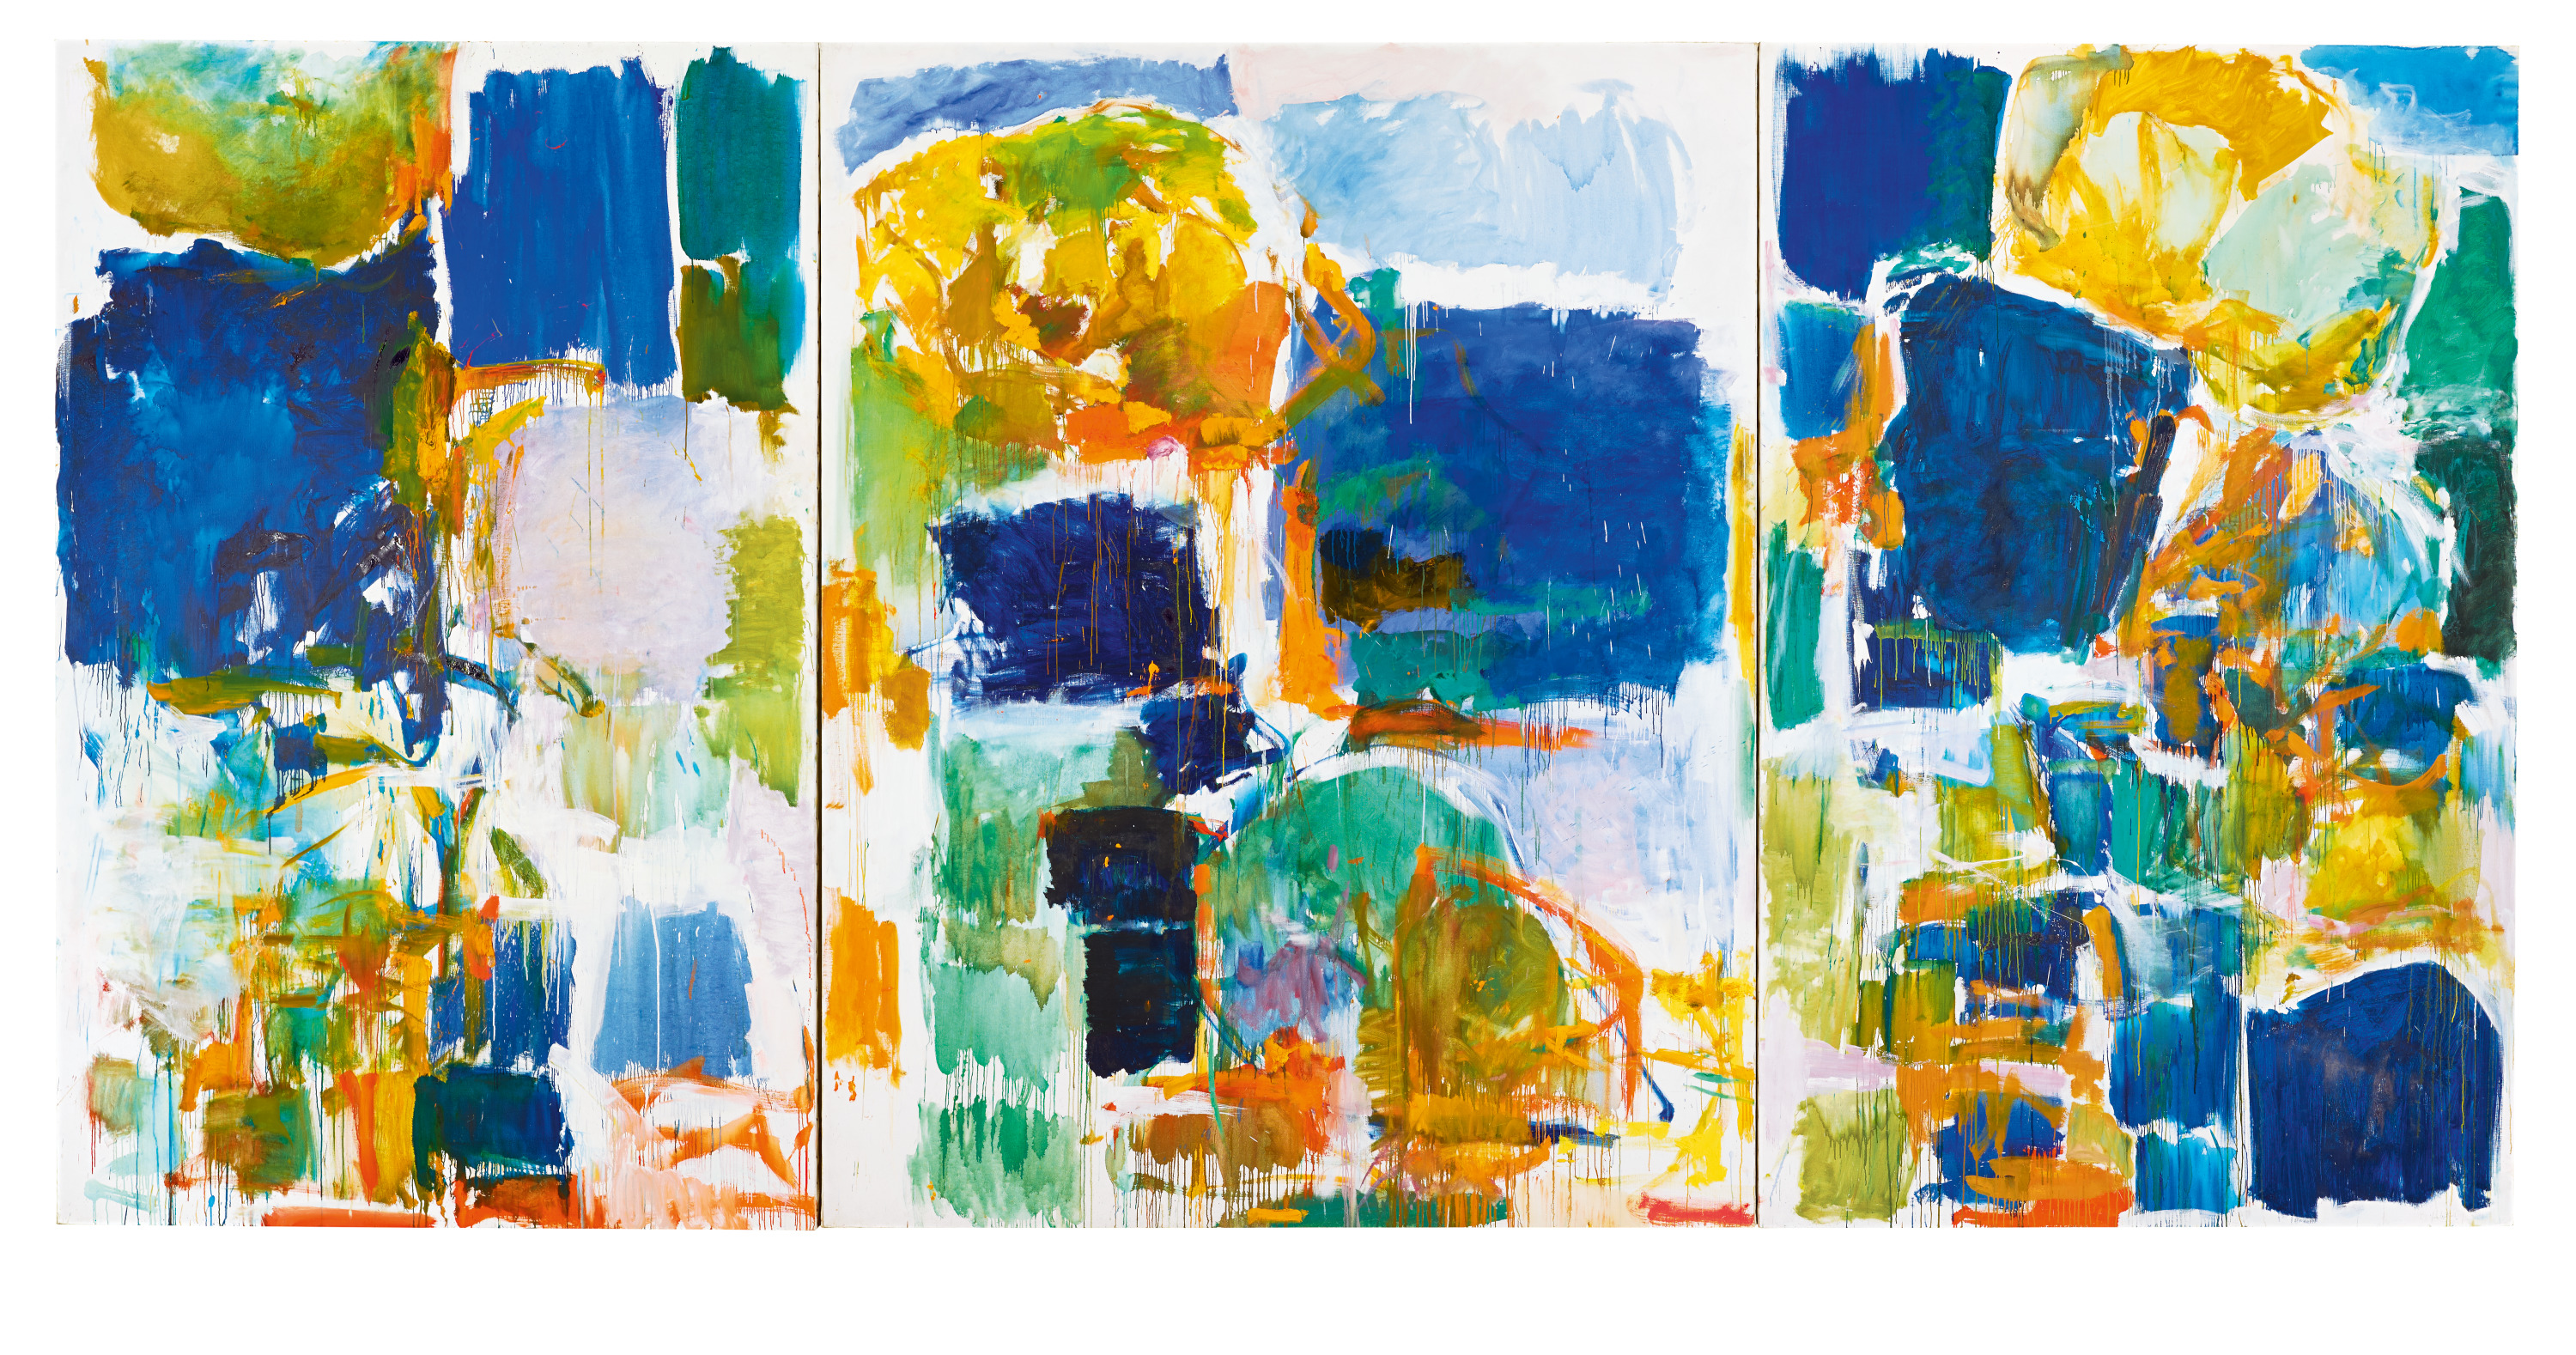 Joan Mitchell, ‘Bonjour Julie,’ 1971. Collection of the Art Fund, Inc. at the Birmingham Museum of Art, purchase with funds provided by the Merton Brown estate and the Thelma Brown trust. © Estate of Joan Mitchell